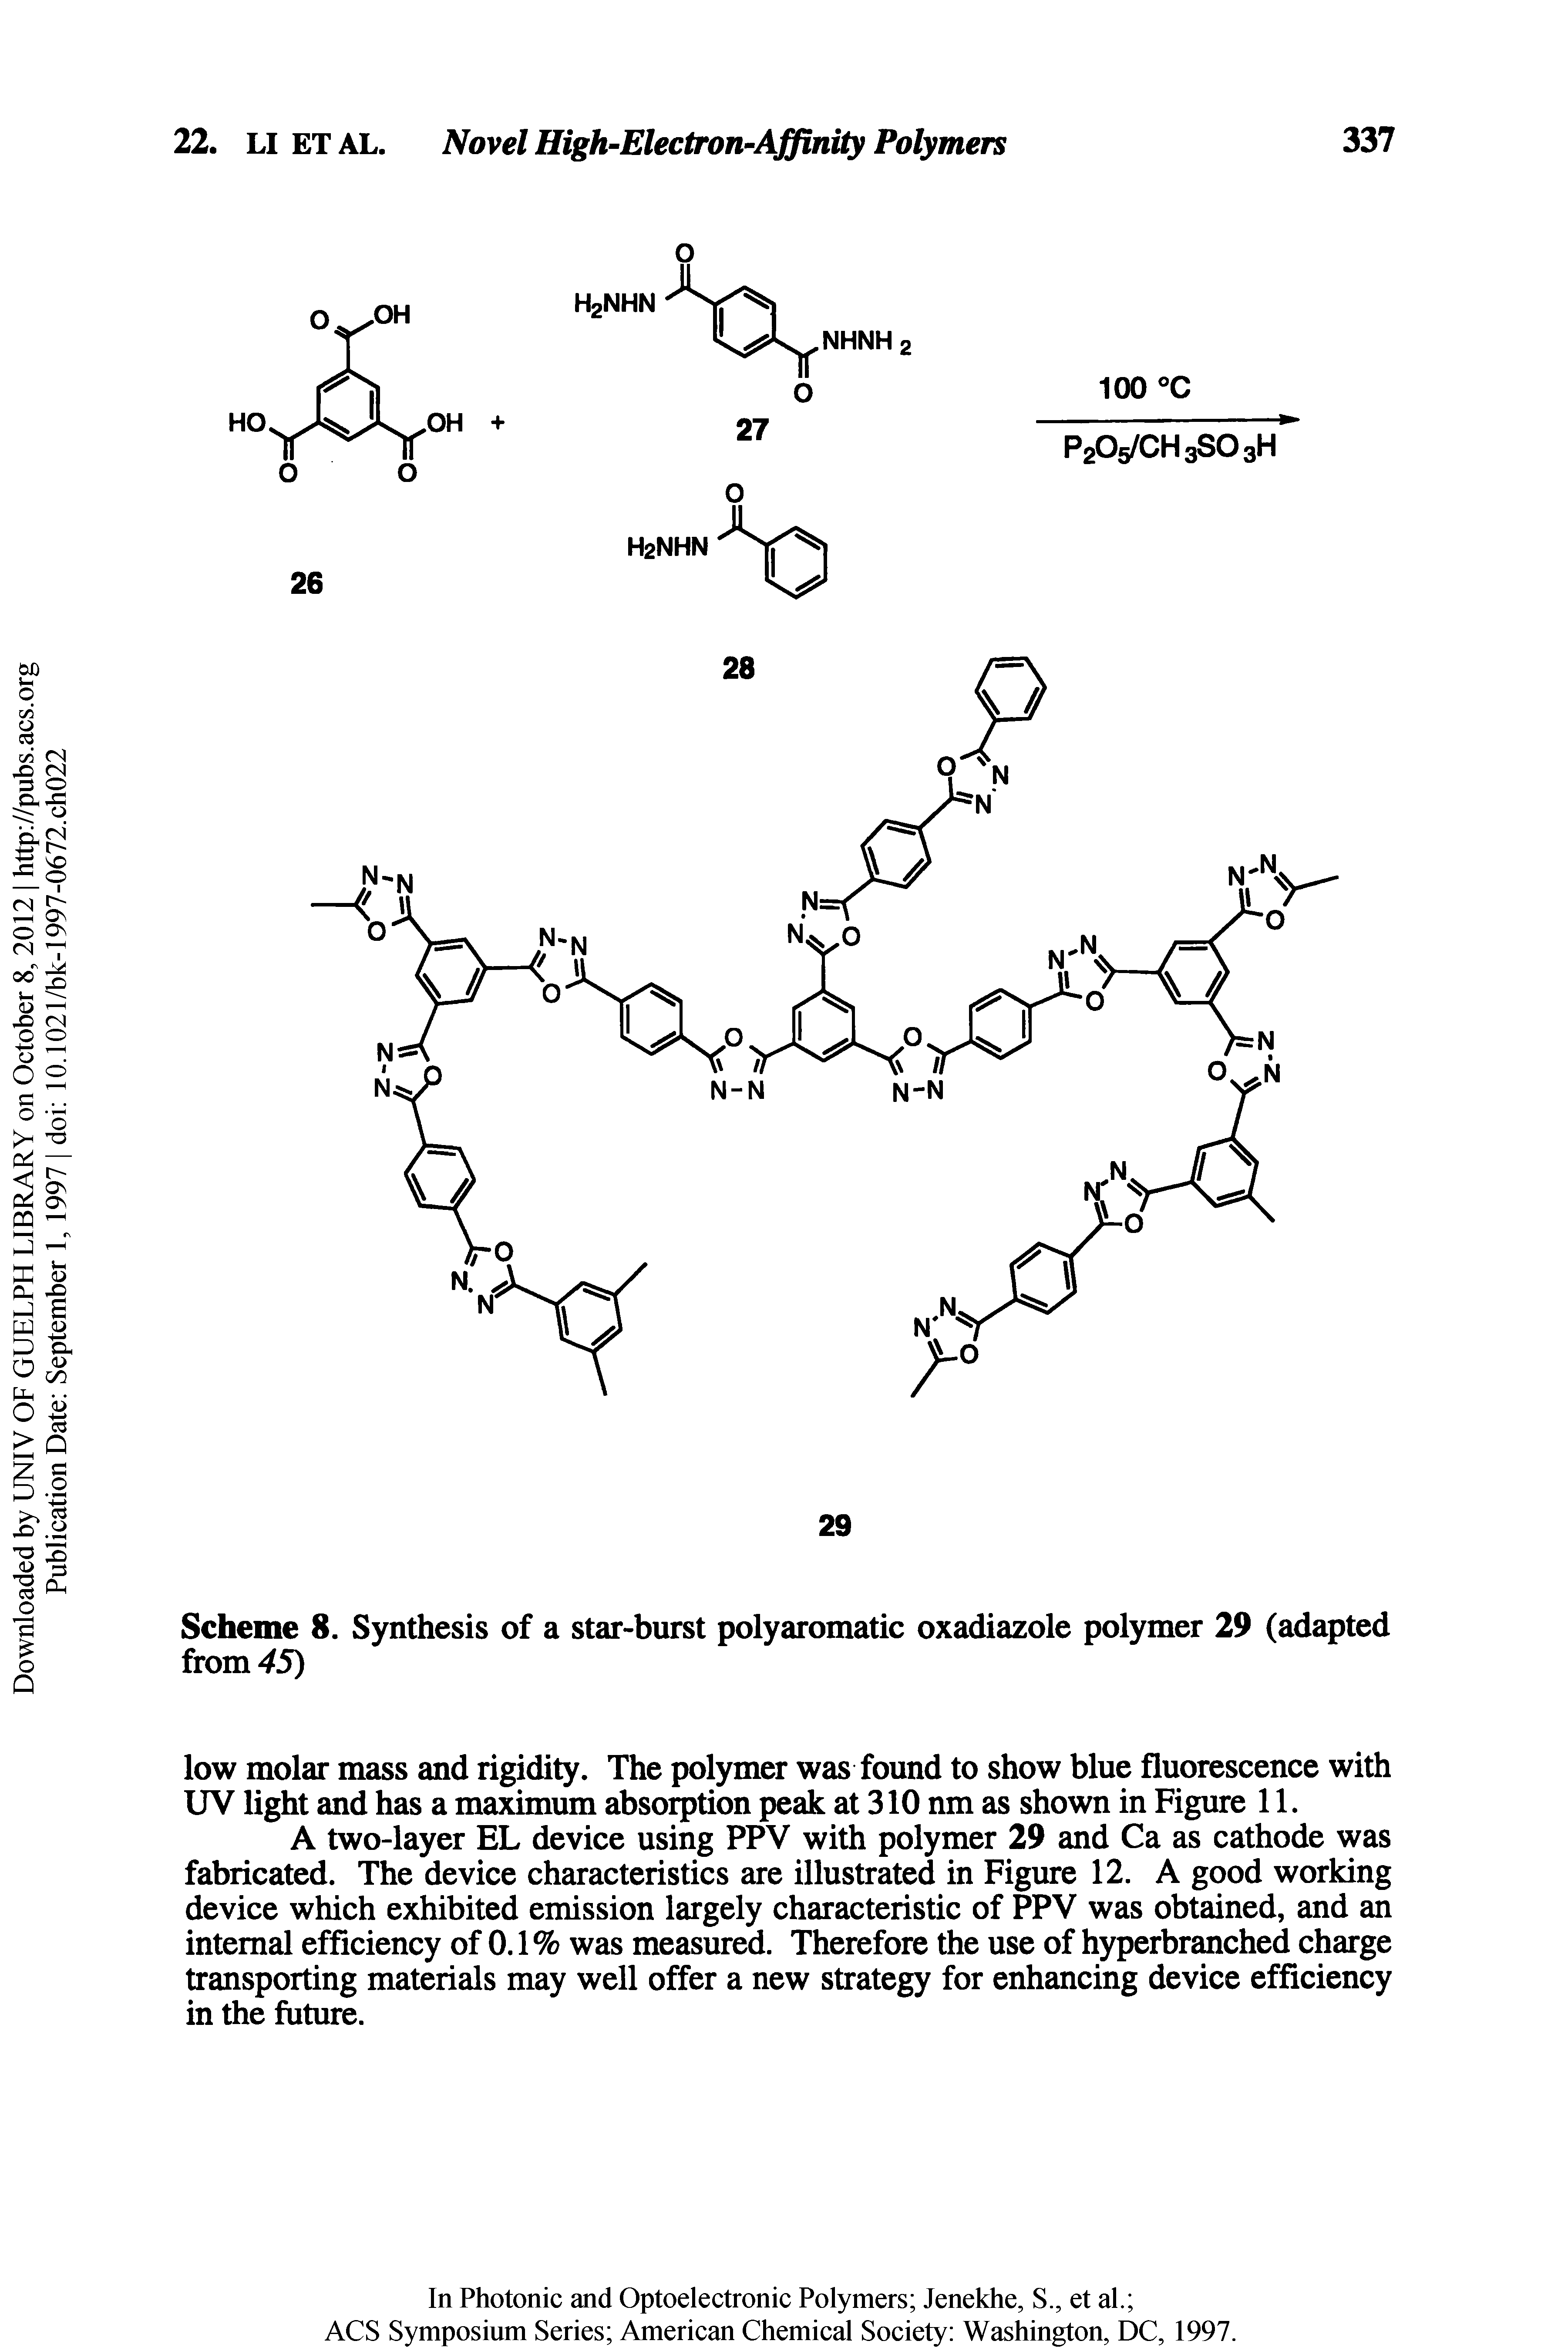 Scheme 8. Synthesis of a star-burst polyaromatic oxadiazole polymer 29 (adapted from 45)...